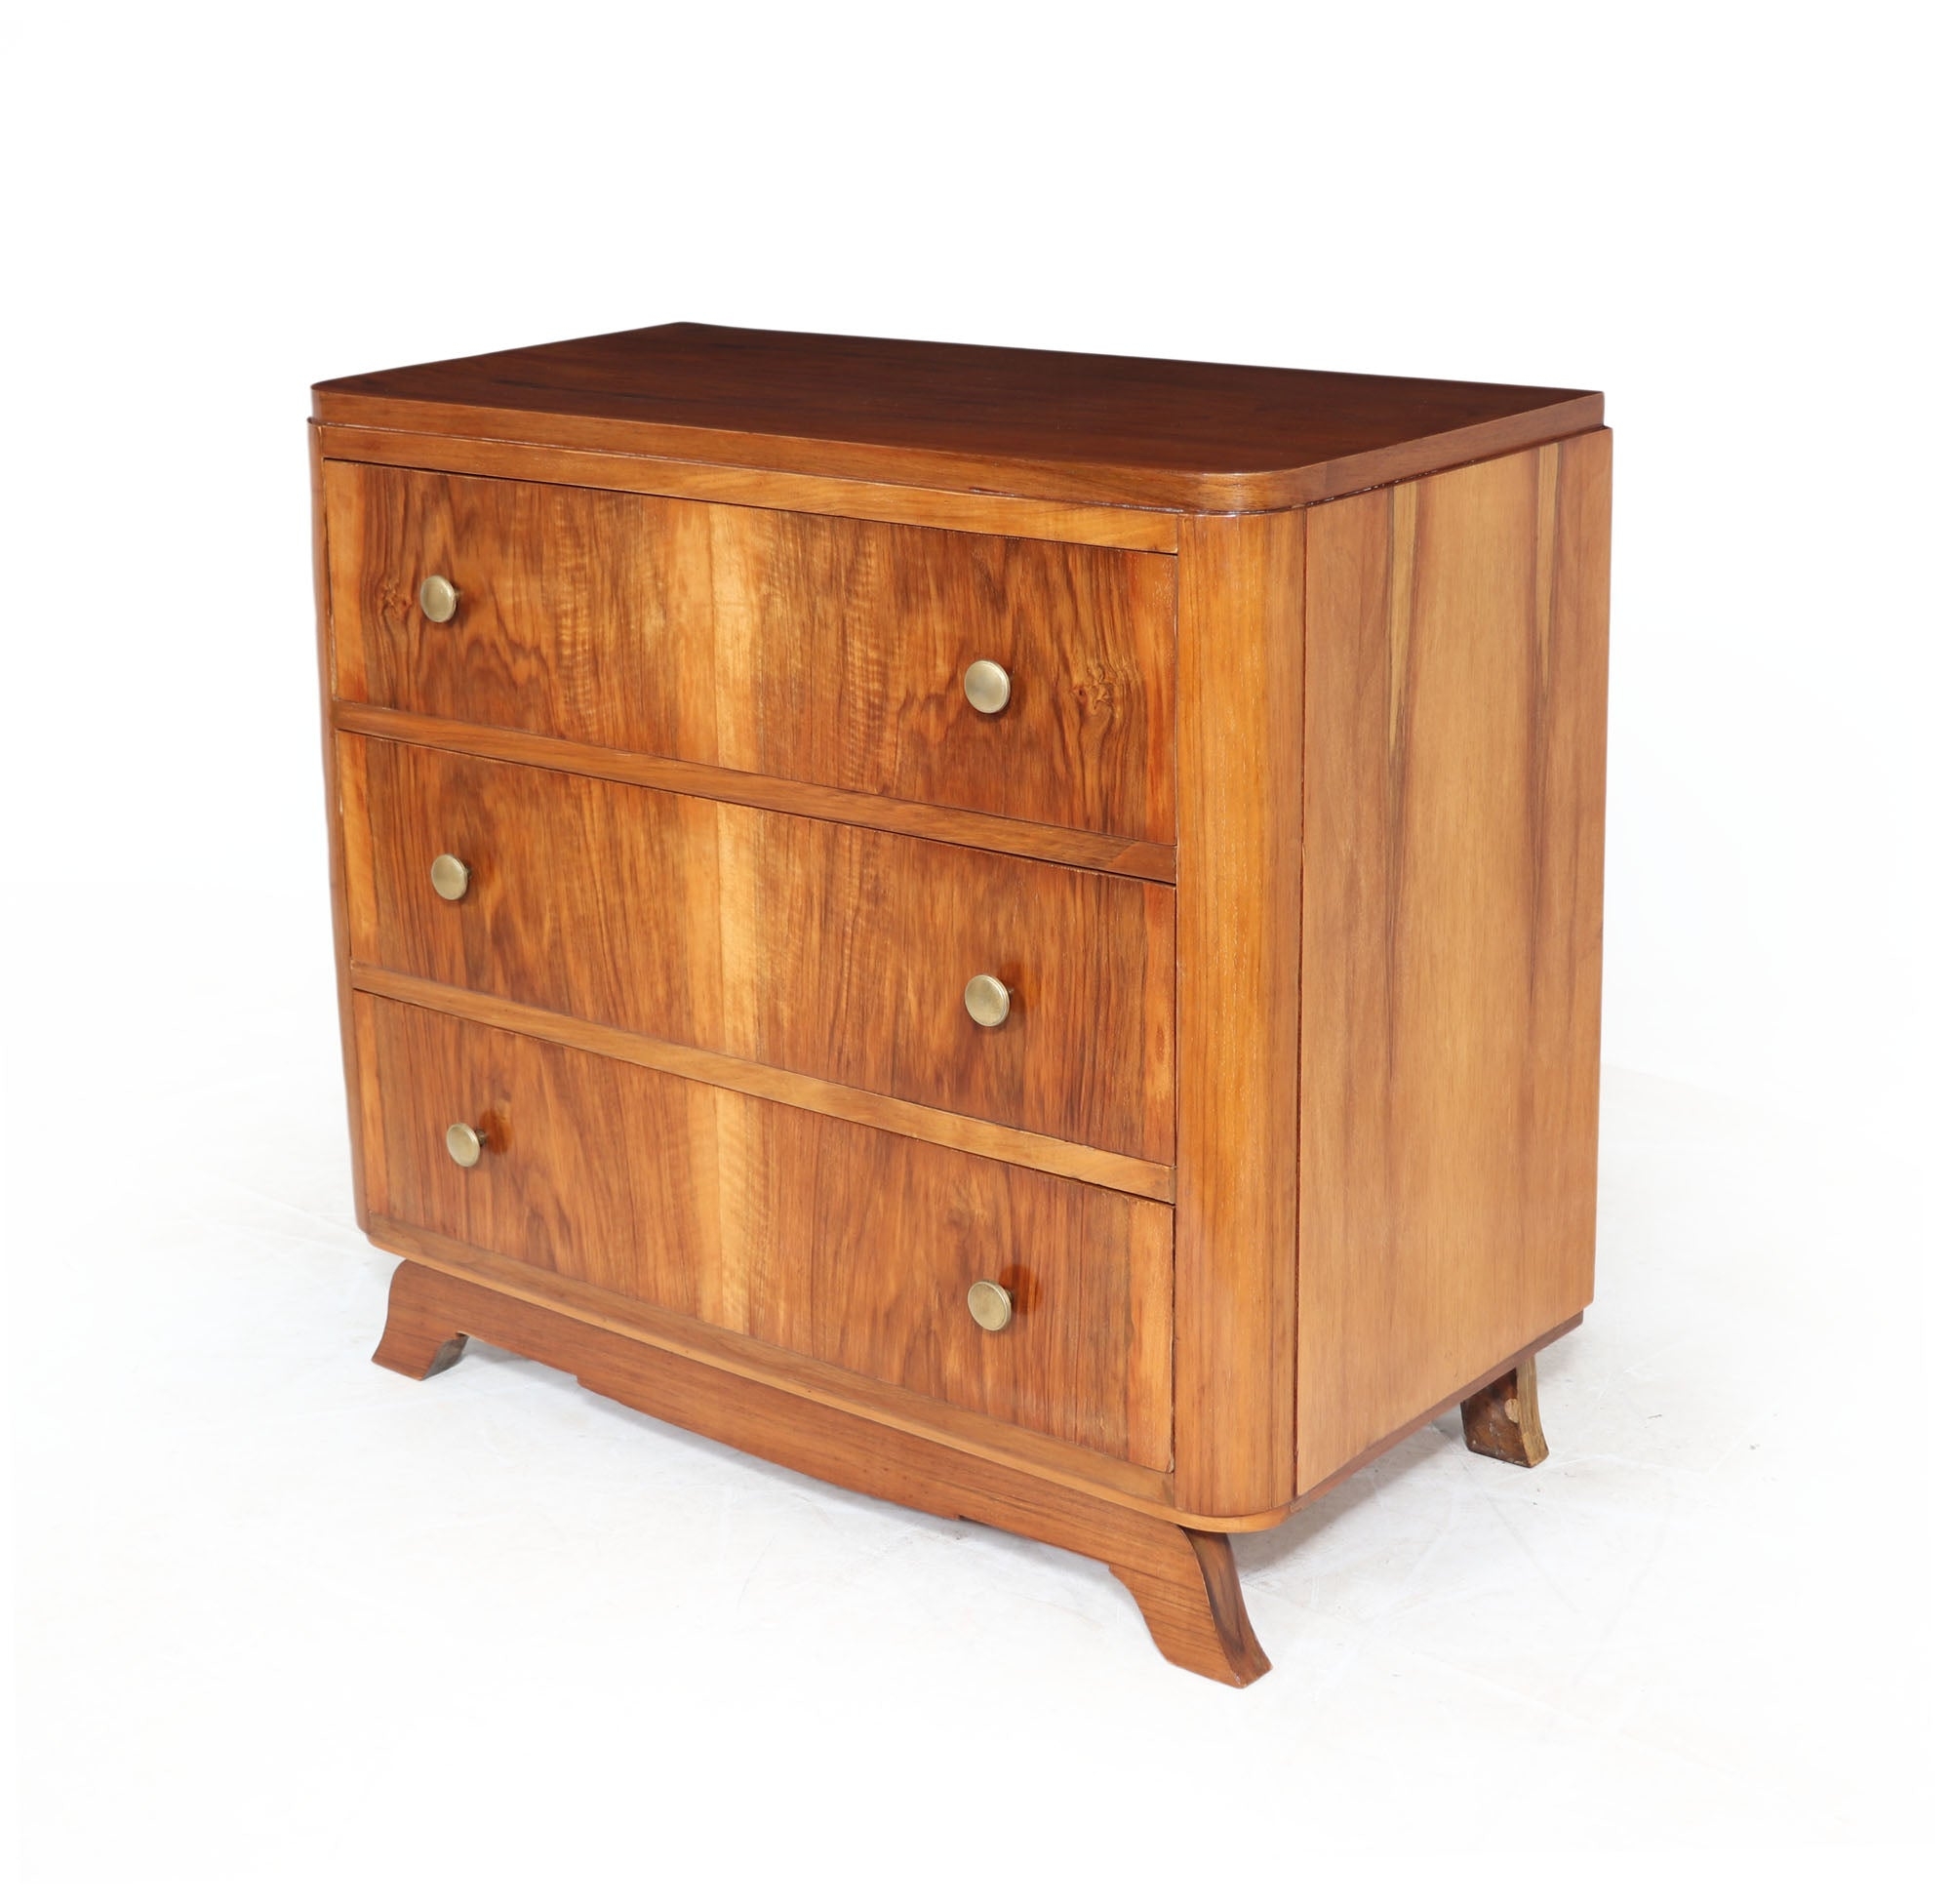 French Art Deco Small Chest of Drawers – The Furniture Rooms